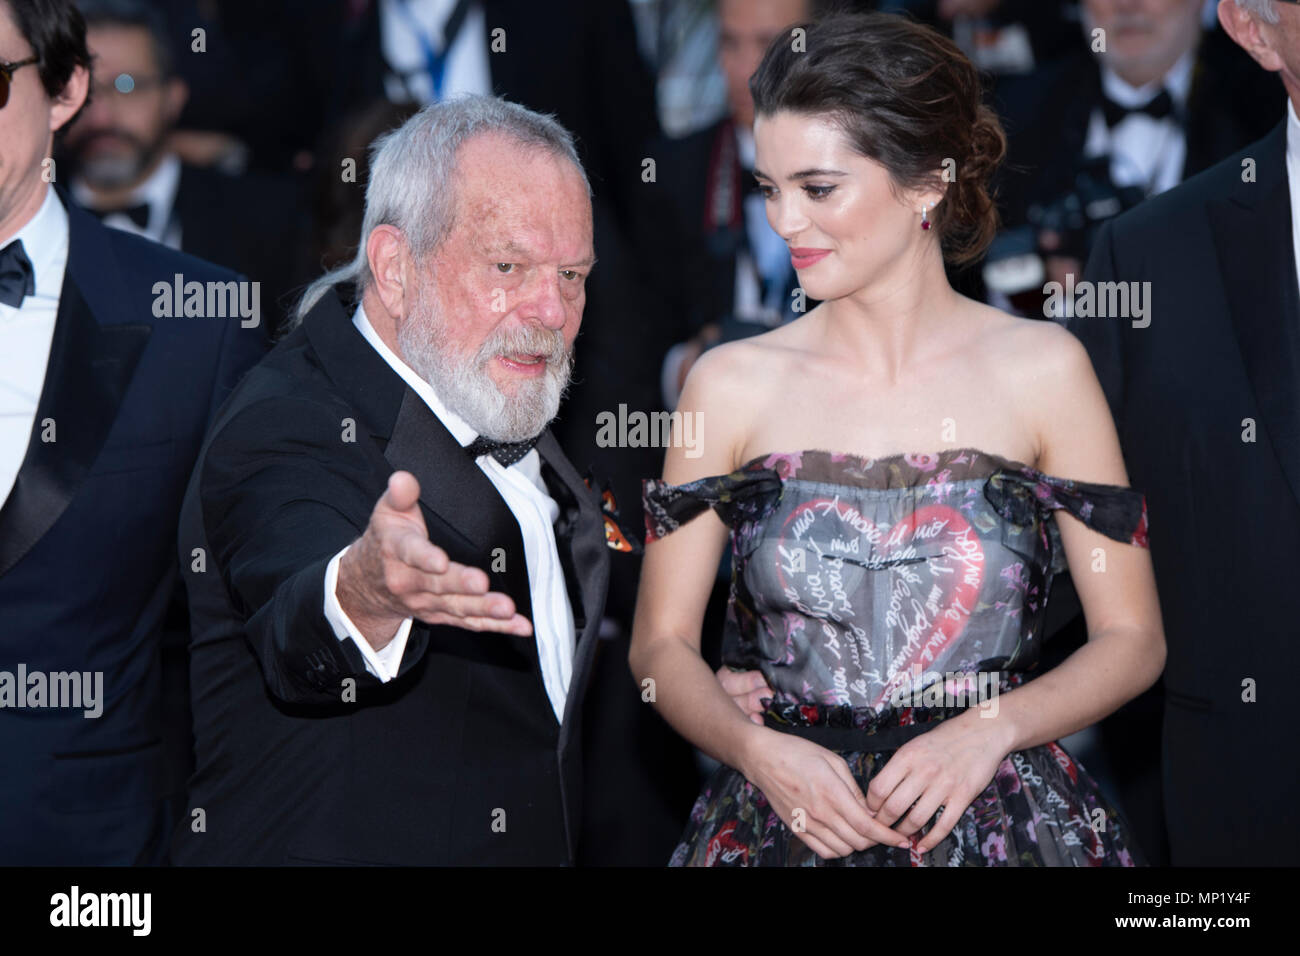 CANNES, FRANCE - MAY 19: Terry Gilliam and Joana Ribeiro attend at the Closing Ceremony & screening of 'The Man Who Killed Don Quixote' during the 71st annual Cannes Film Festival at Palais des Festivals on May May 19, 2018 in Cannes, France Credit: BTWImages/Alamy Live News Stock Photo